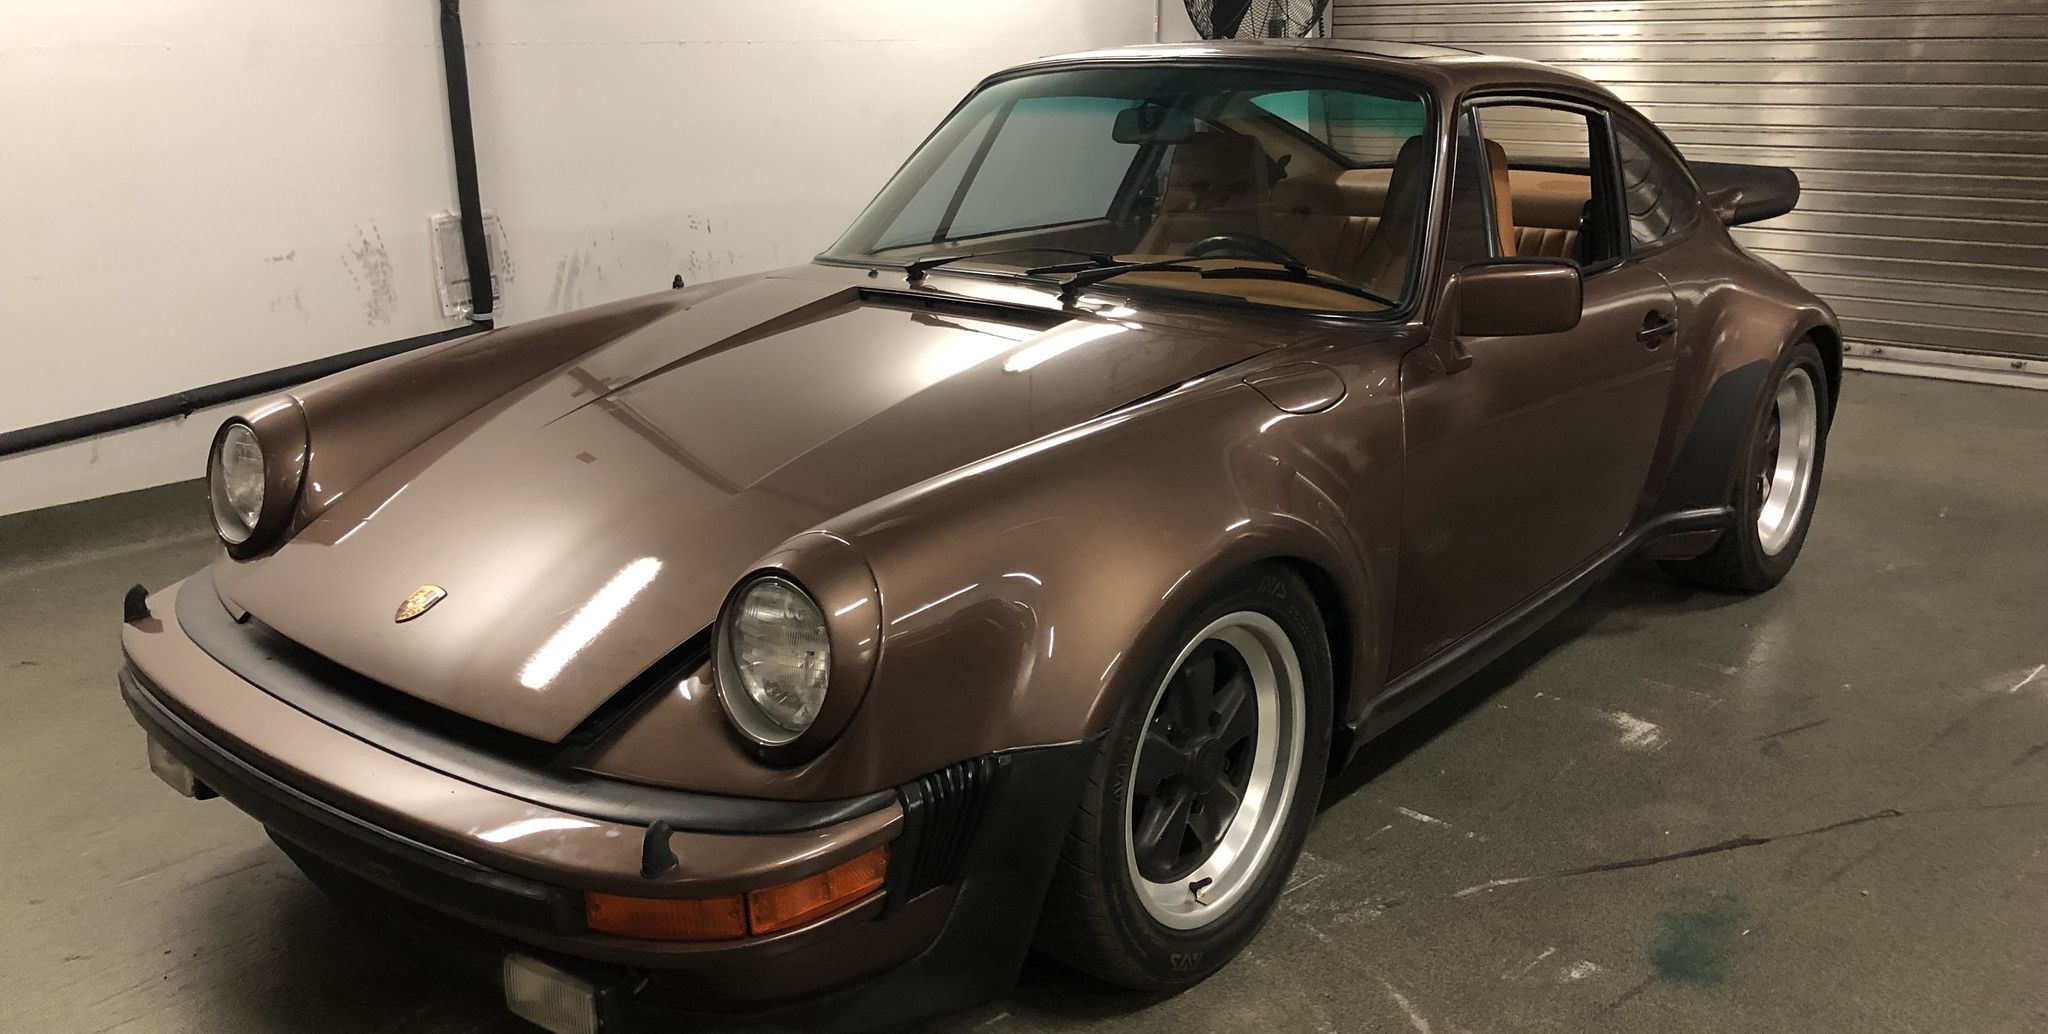 Florida Man Arrested After Registering Porsche 930 Turbo Stolen From Museum, Police Say